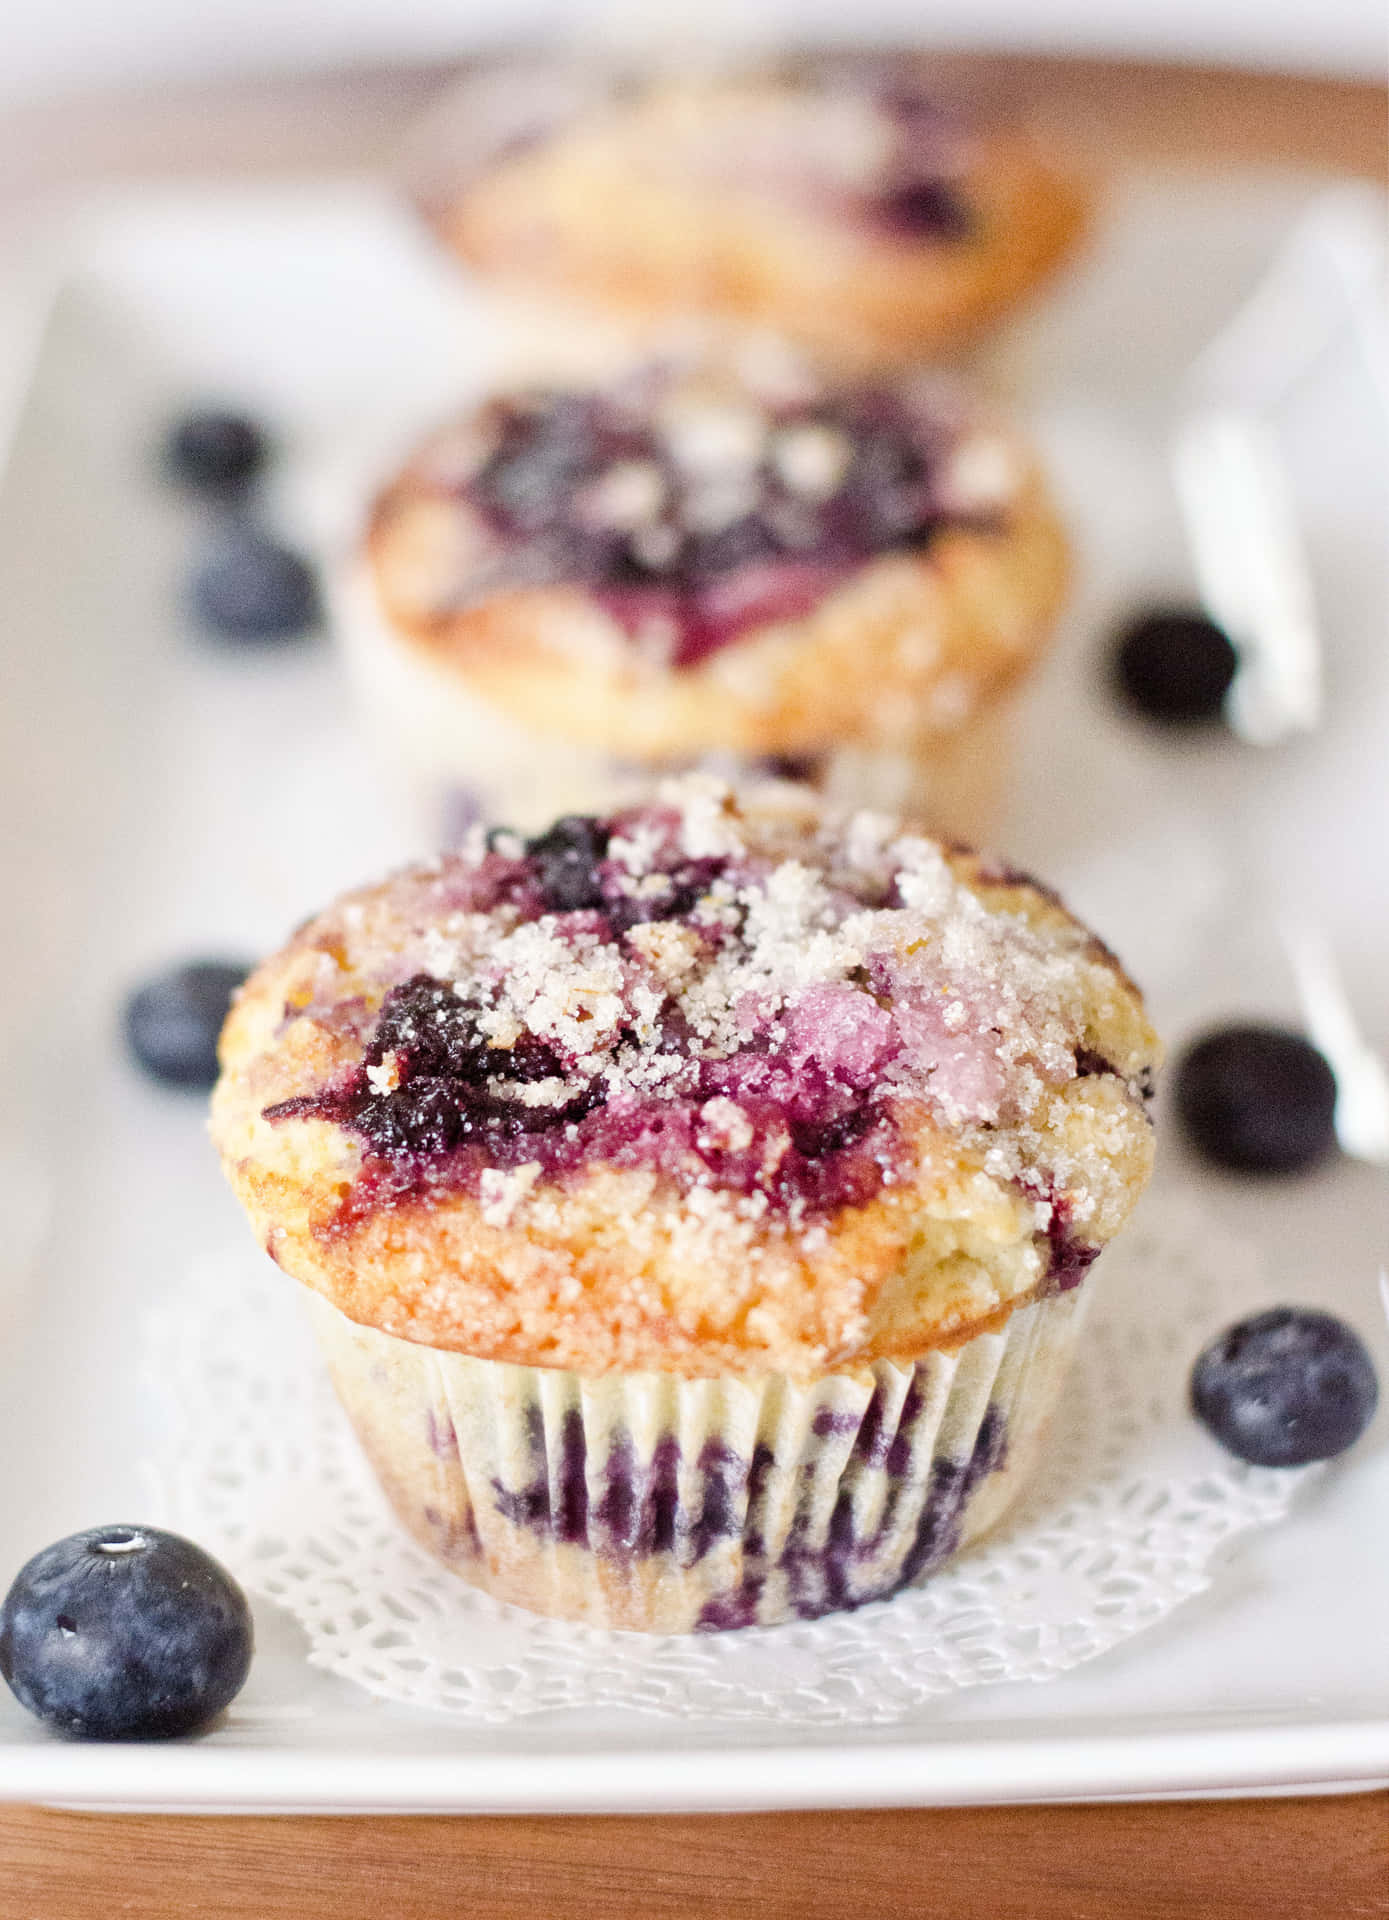 Blueberry muffins, the perfect sweet snack. Wallpaper